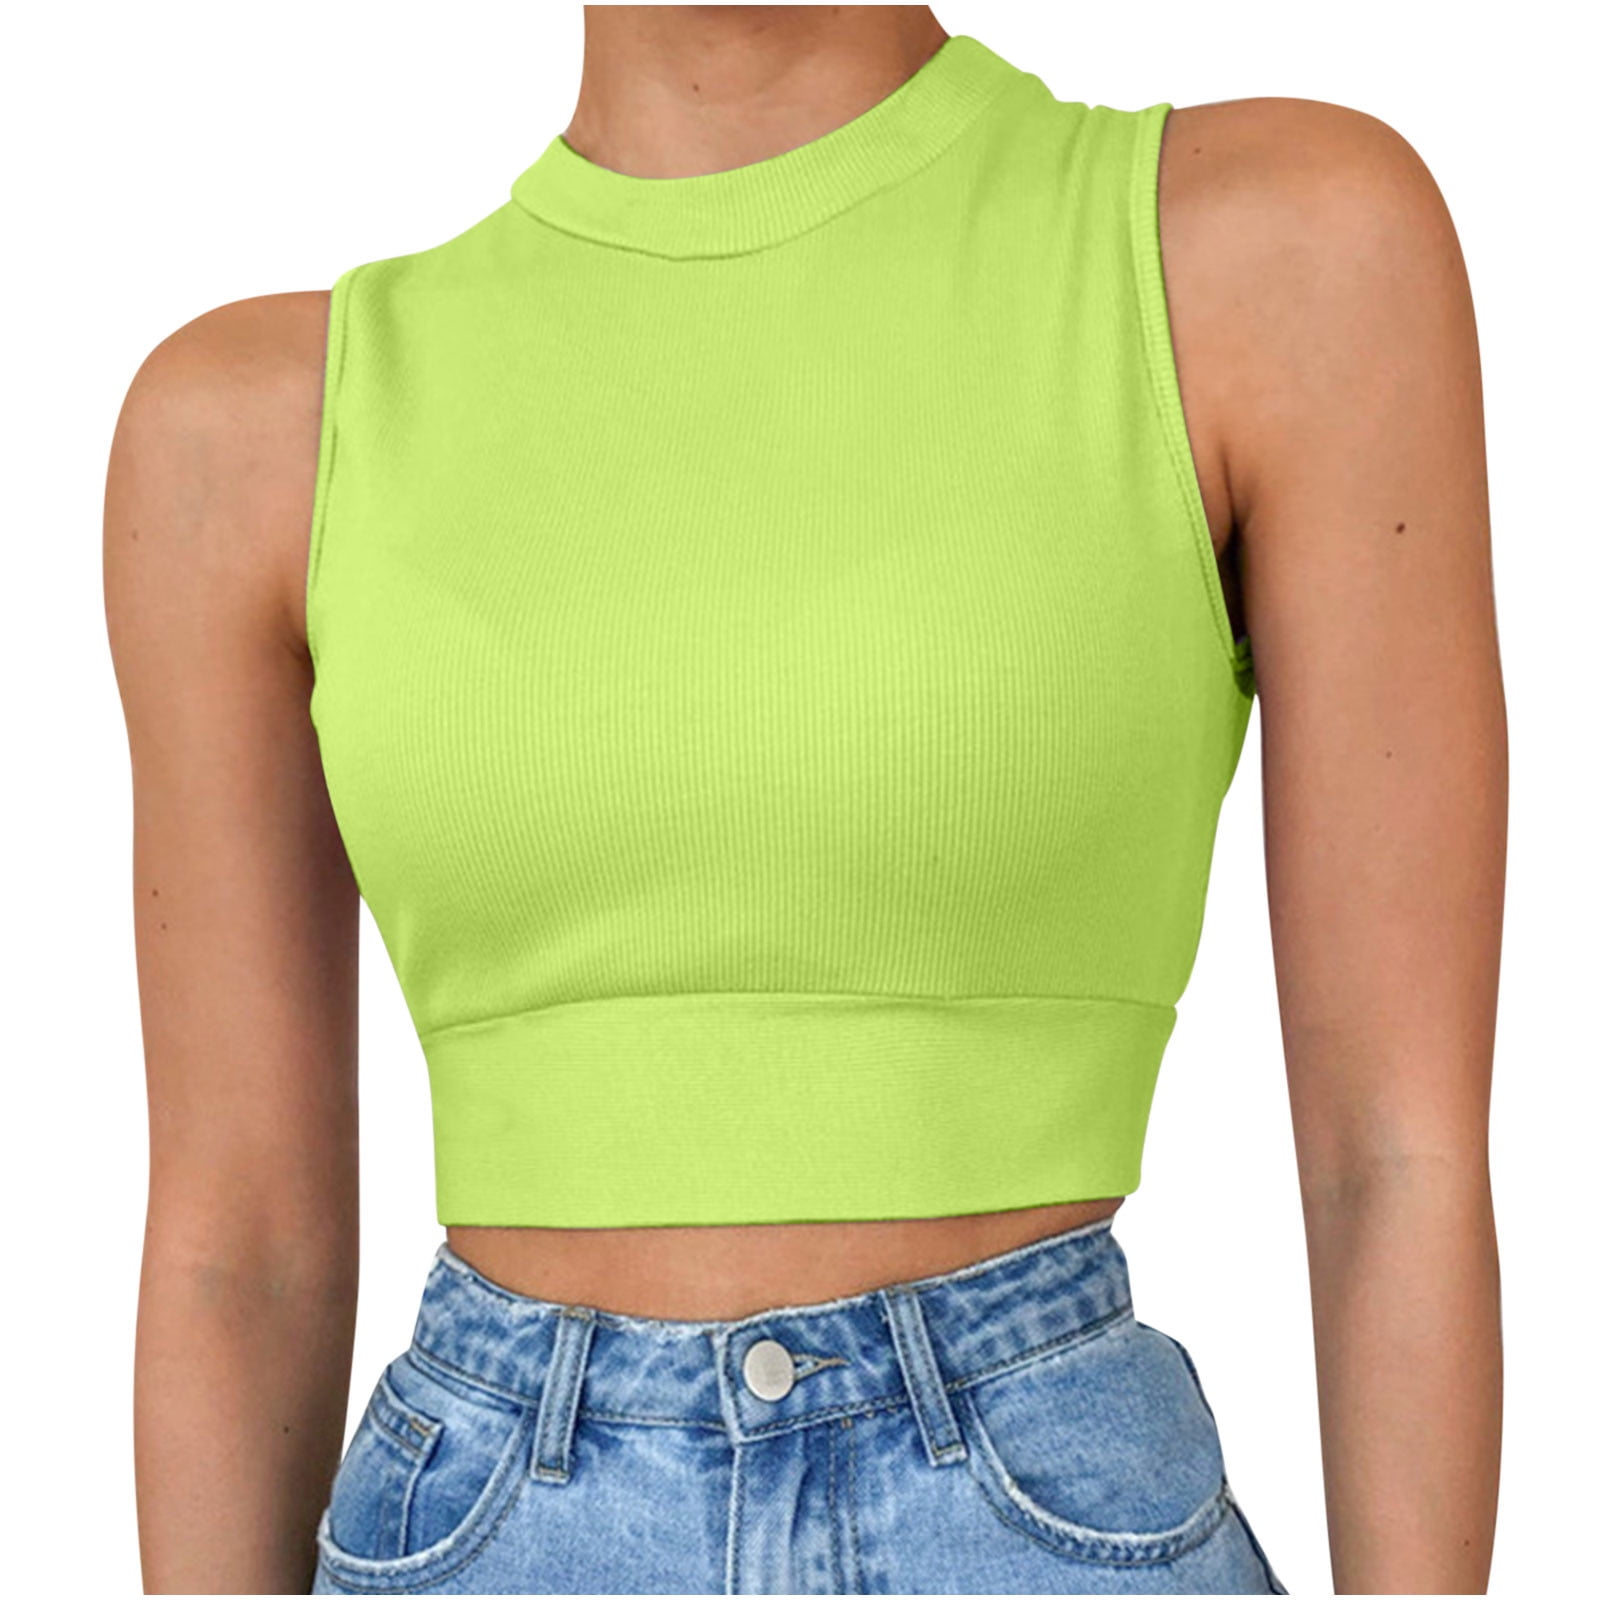 CYMMPU Workout Crop Tank Shirts for Women Back Cut Out Tie Knot Summer  Sleeveless Slim Fit Tank Tops Solid Crewneck Vest Top Black 